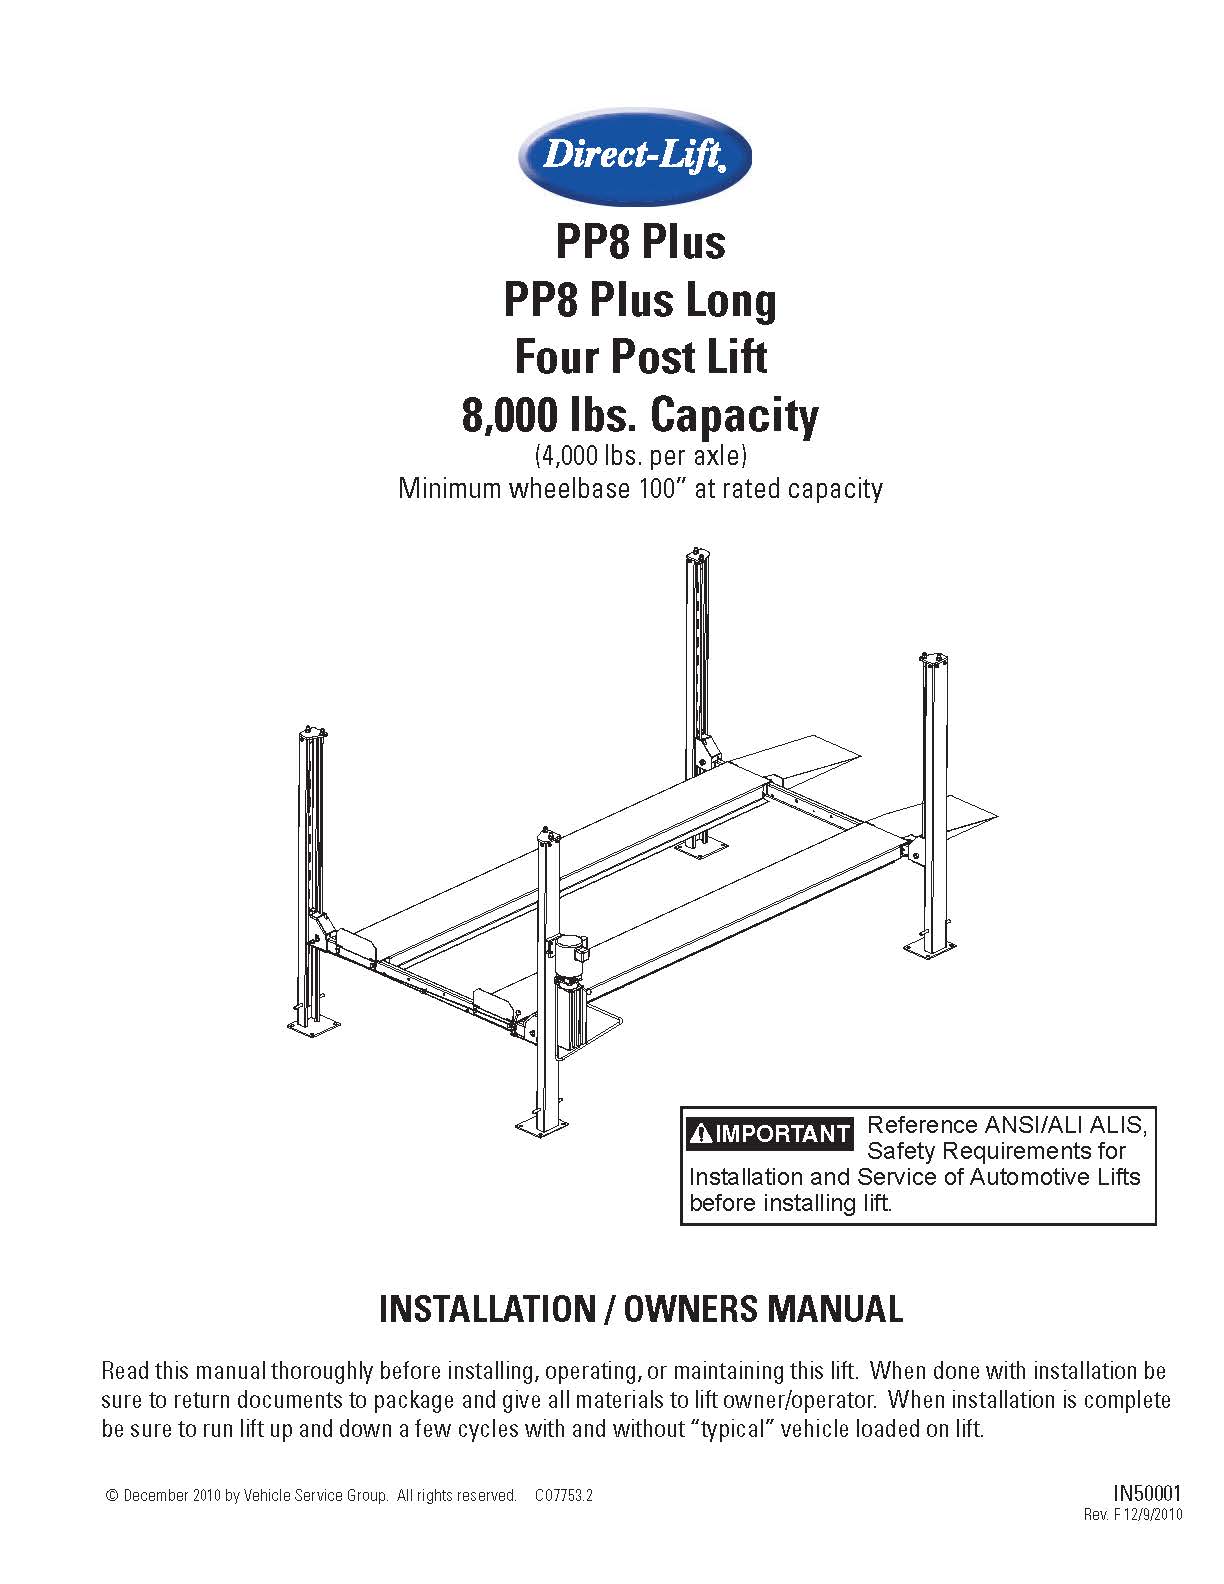 propark8plus Manual cover page.jpg